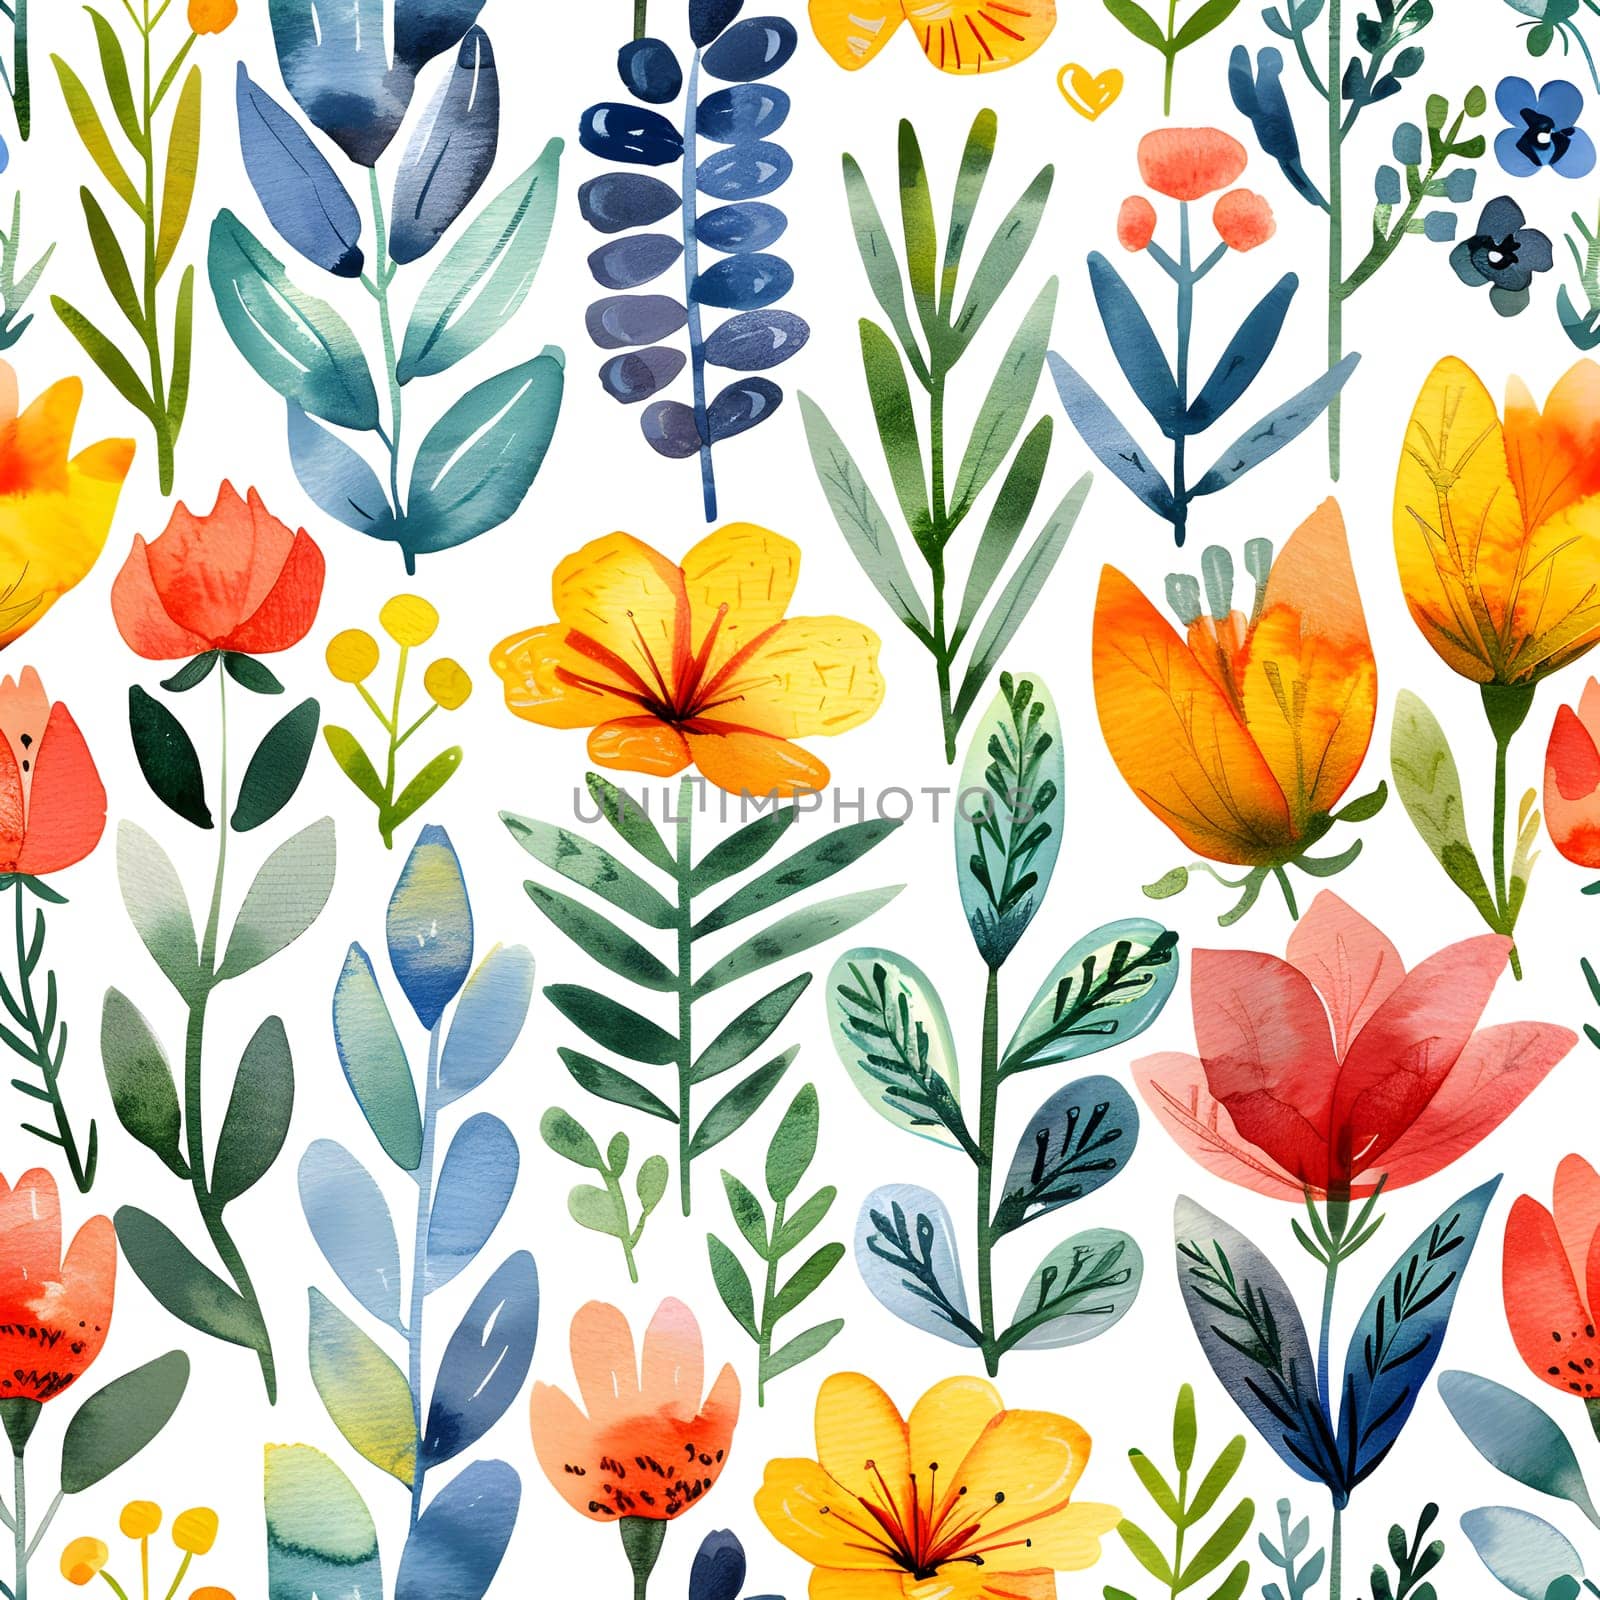 A beautiful seamless pattern featuring watercolor flowers, leaves, and petals on a white background. Perfect for adding a touch of botanical art to dishware, textiles, or serveware